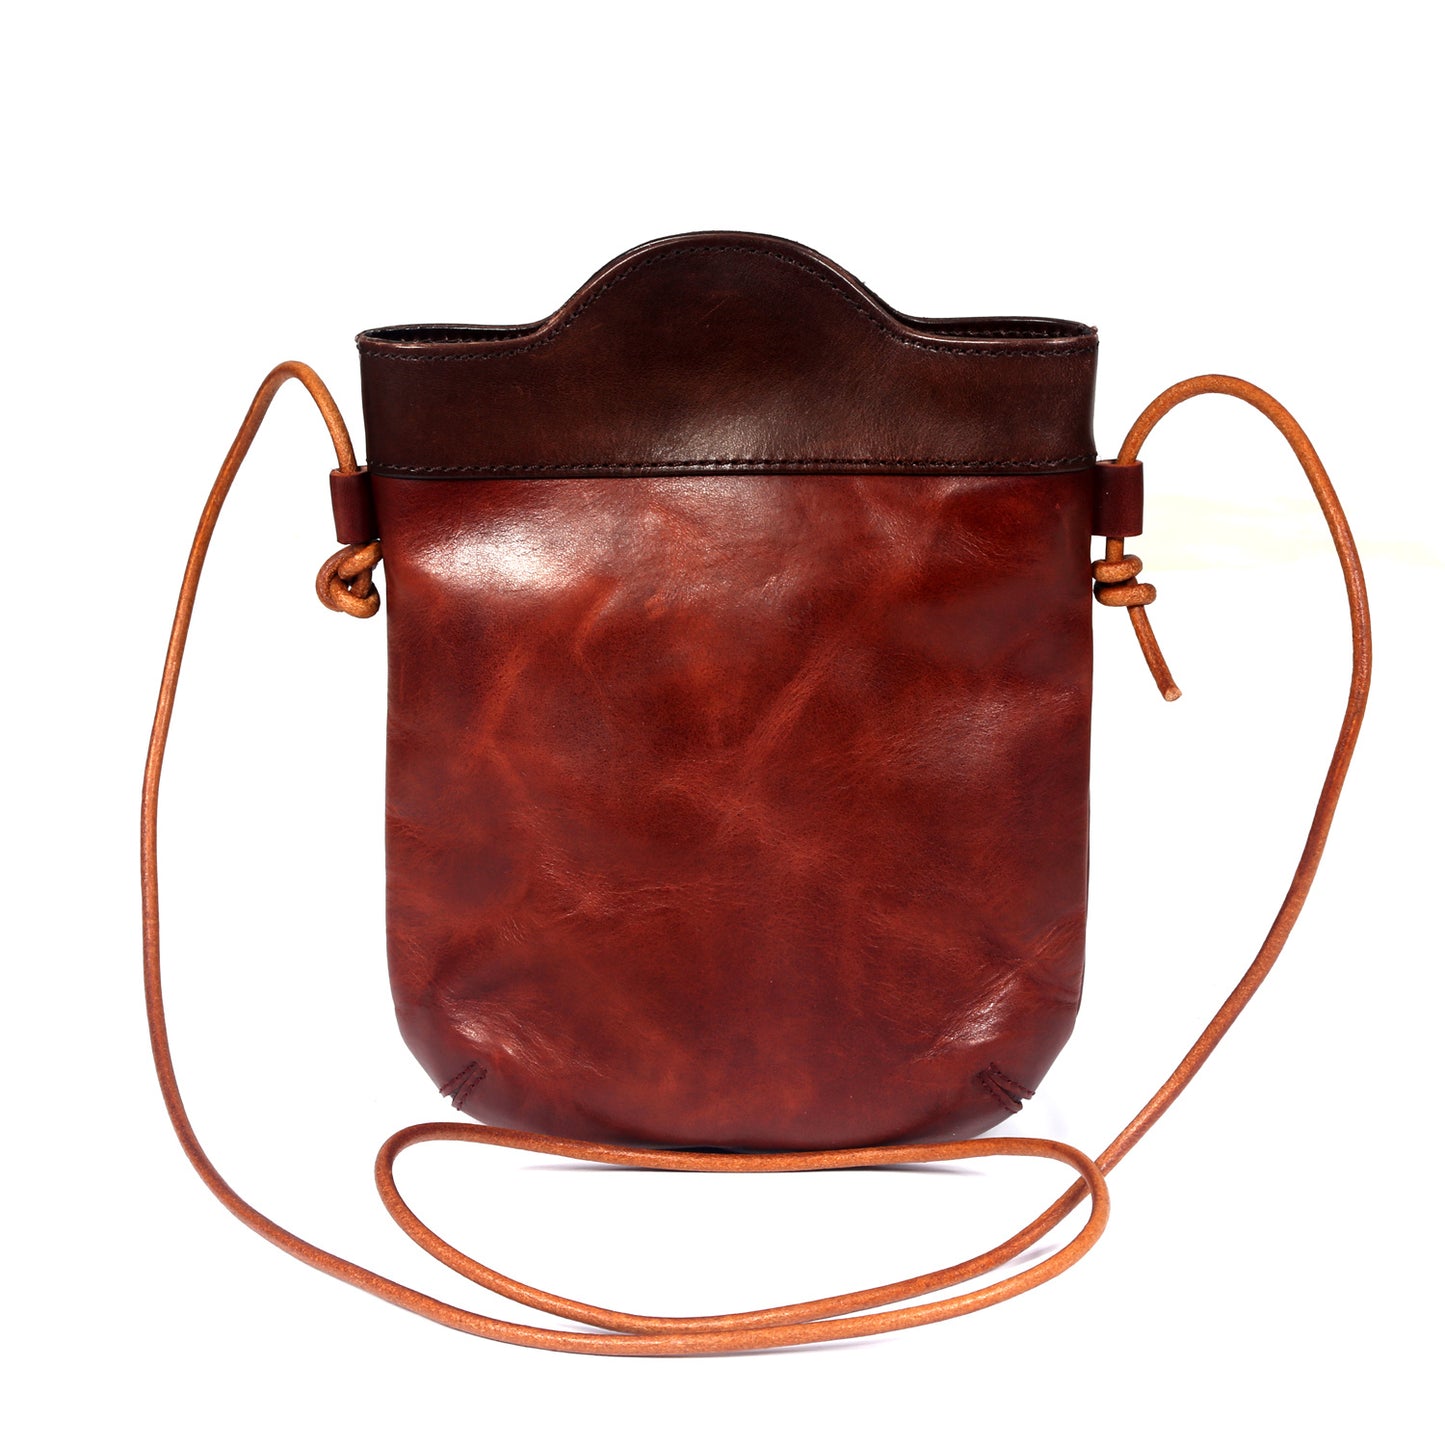 Old Trend Genuine Leather Out West Crossbody